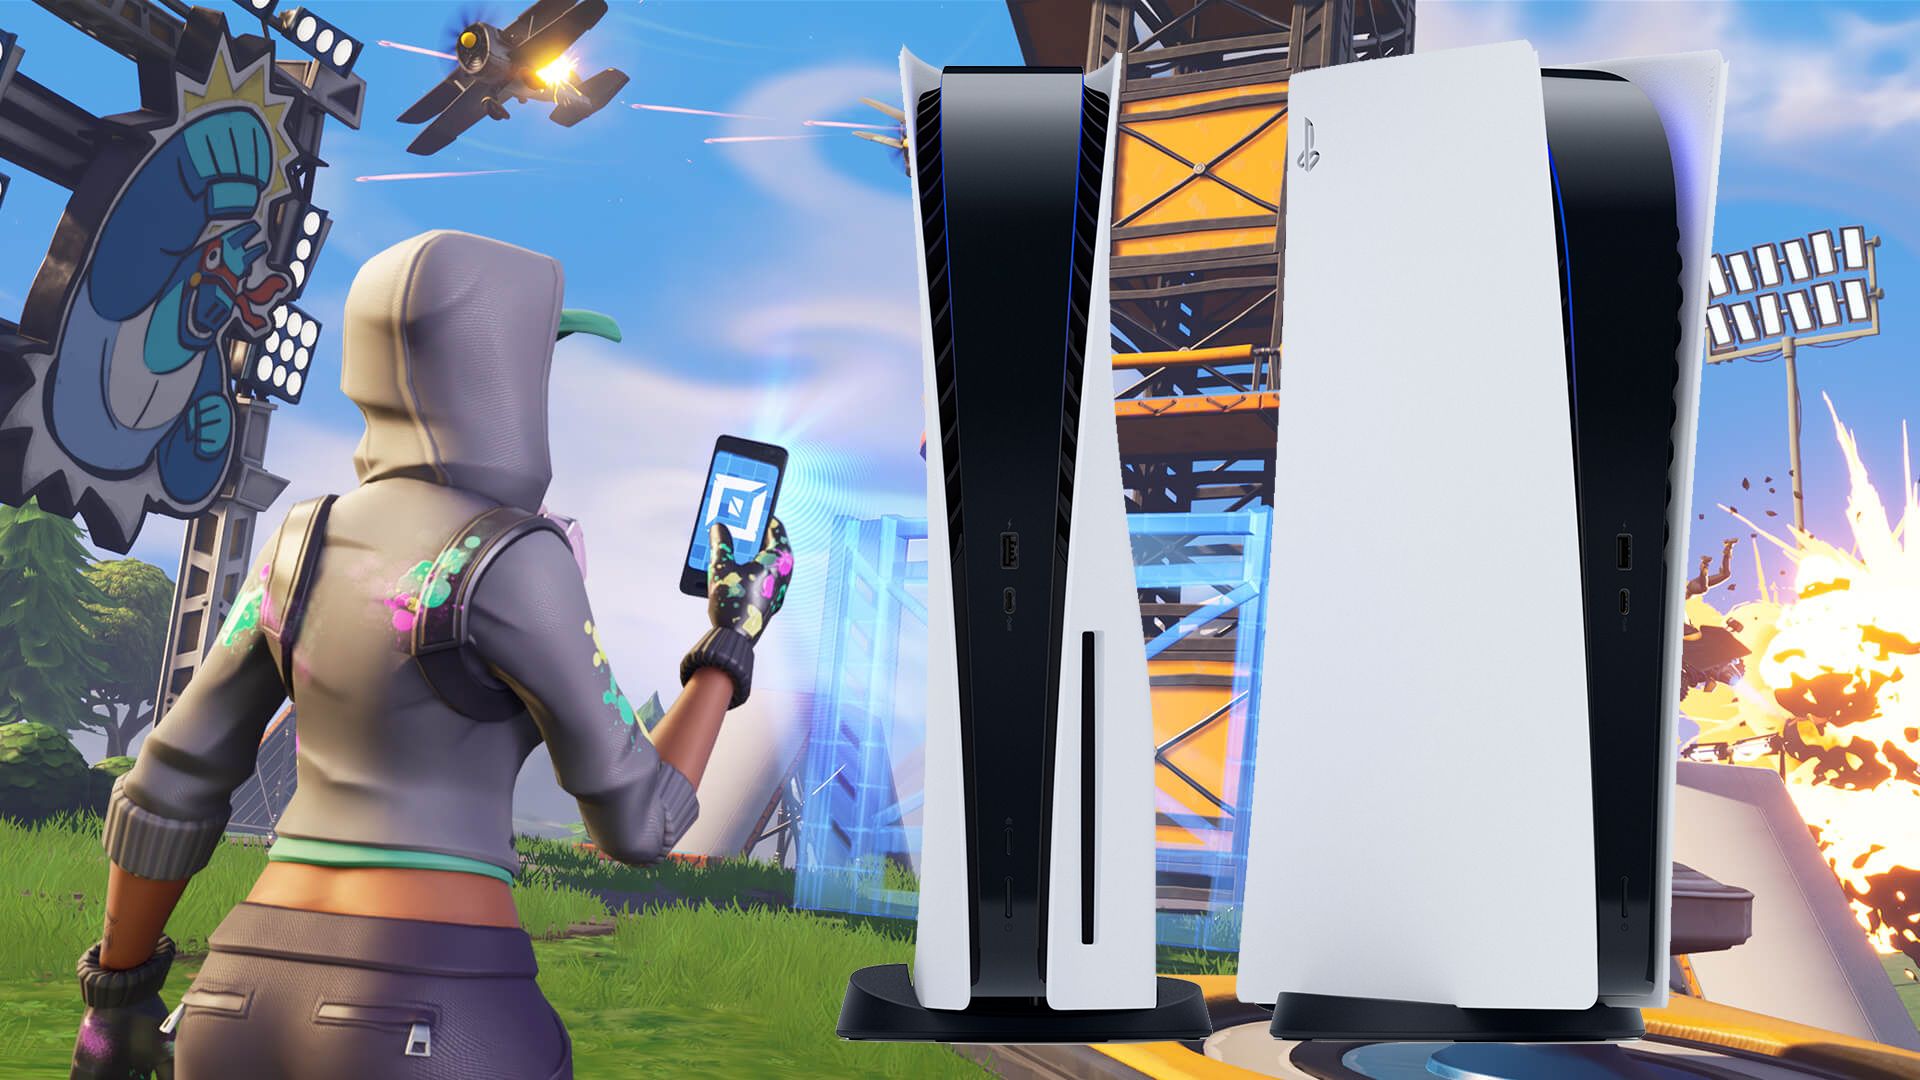 Has the PS5 release date just been leaked by Fortnite?